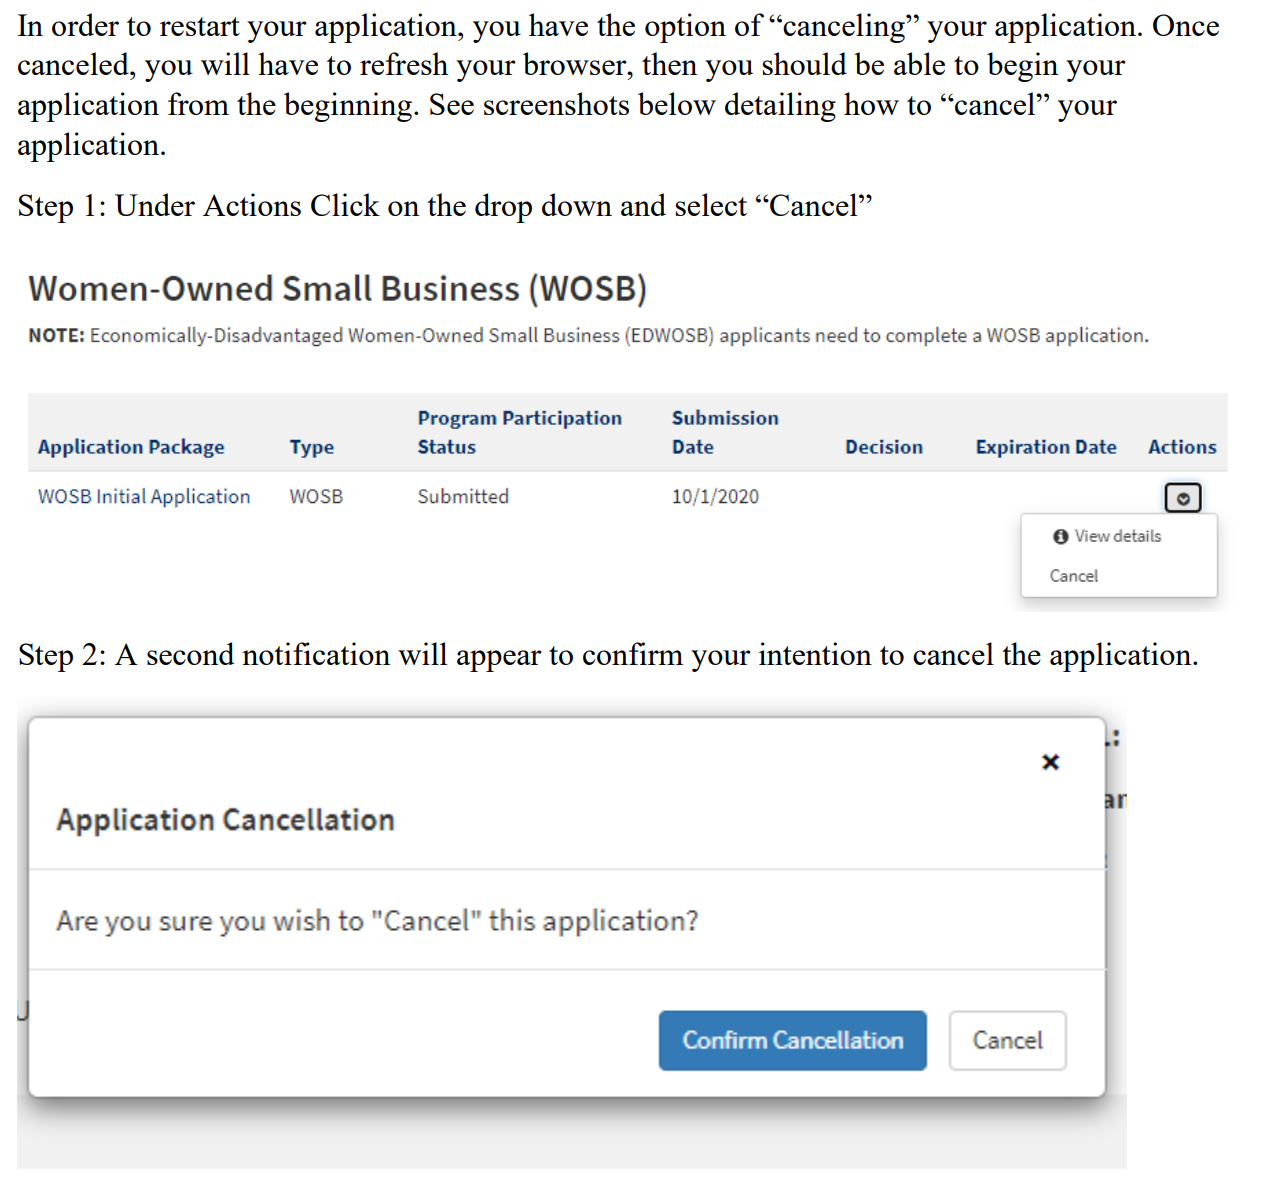 In Order to restart your application, you have the option of canceling your application. Once canceled, you will have to refresh your browser, then you should be able to begin your application from the beginning. See screenshots below detailing how to cancel your application. Step 1 Under Actions Click on the drop down and select Cancel.